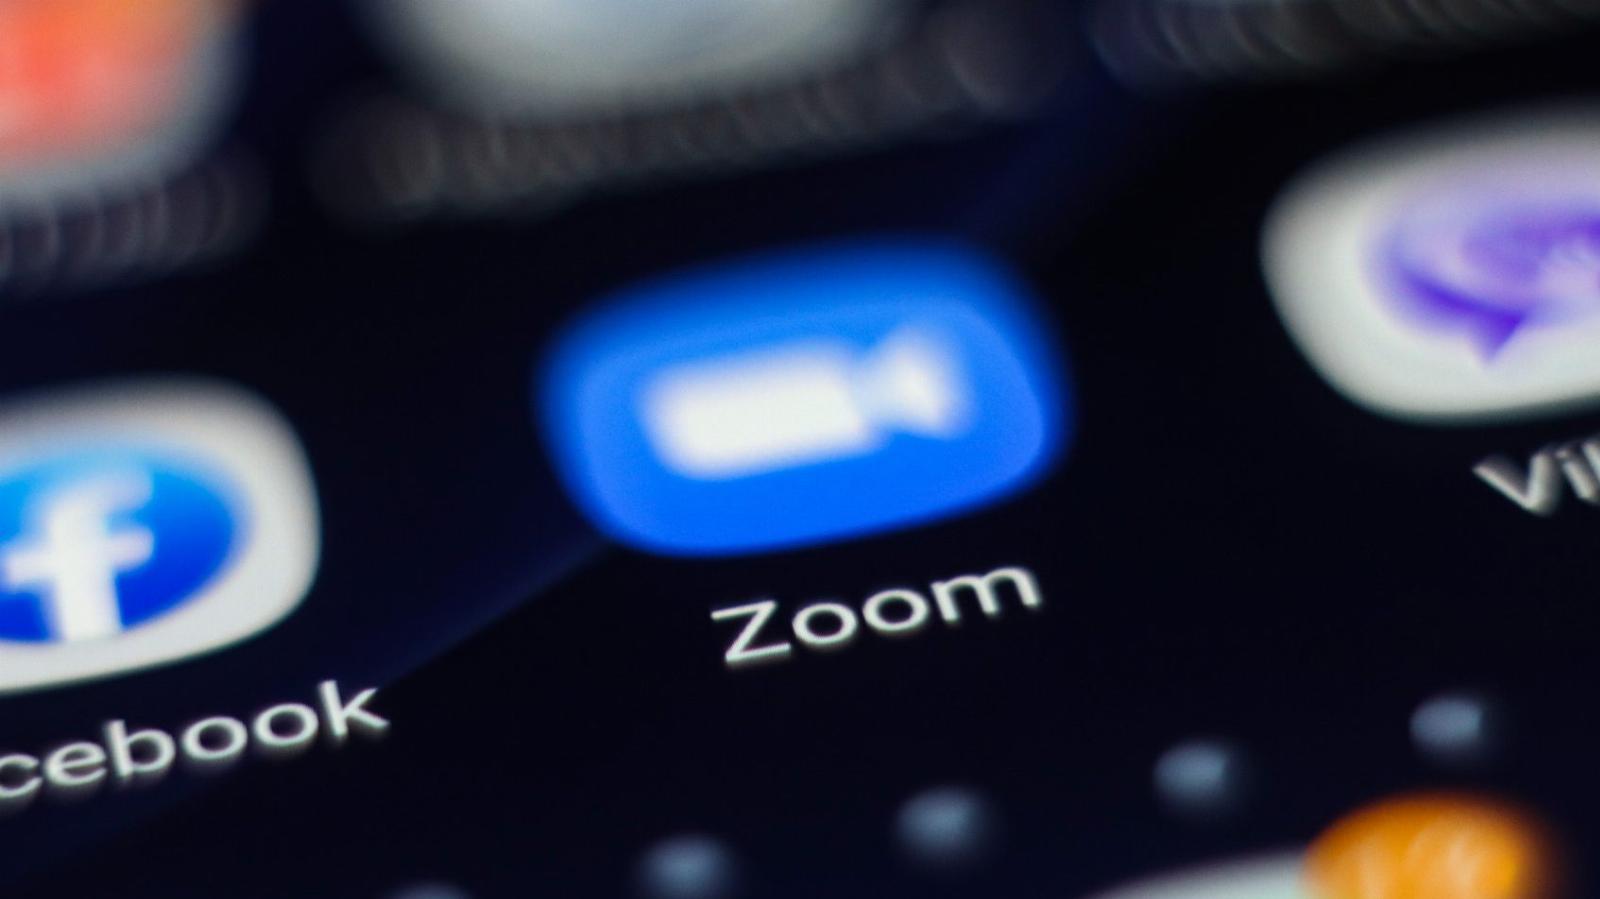 Open source developers urged to ditch Zoom over user data controversy